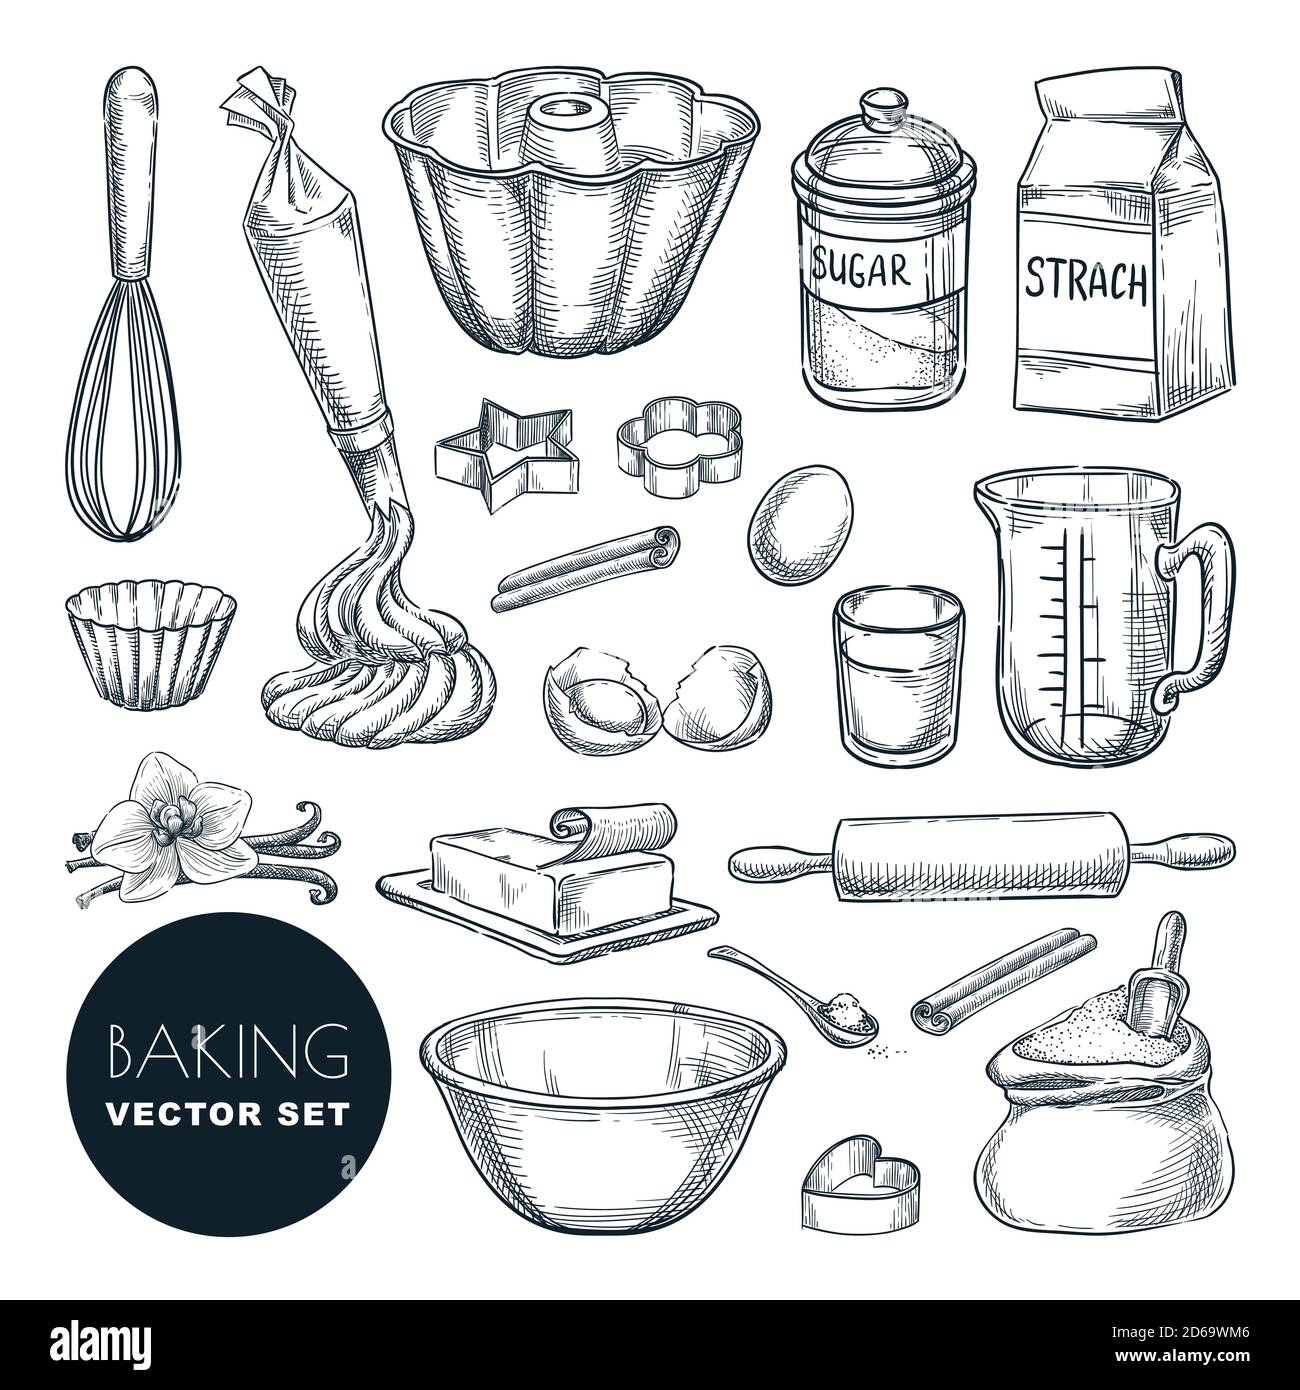 Free Vector  Food and baking tools set pastry making equipment